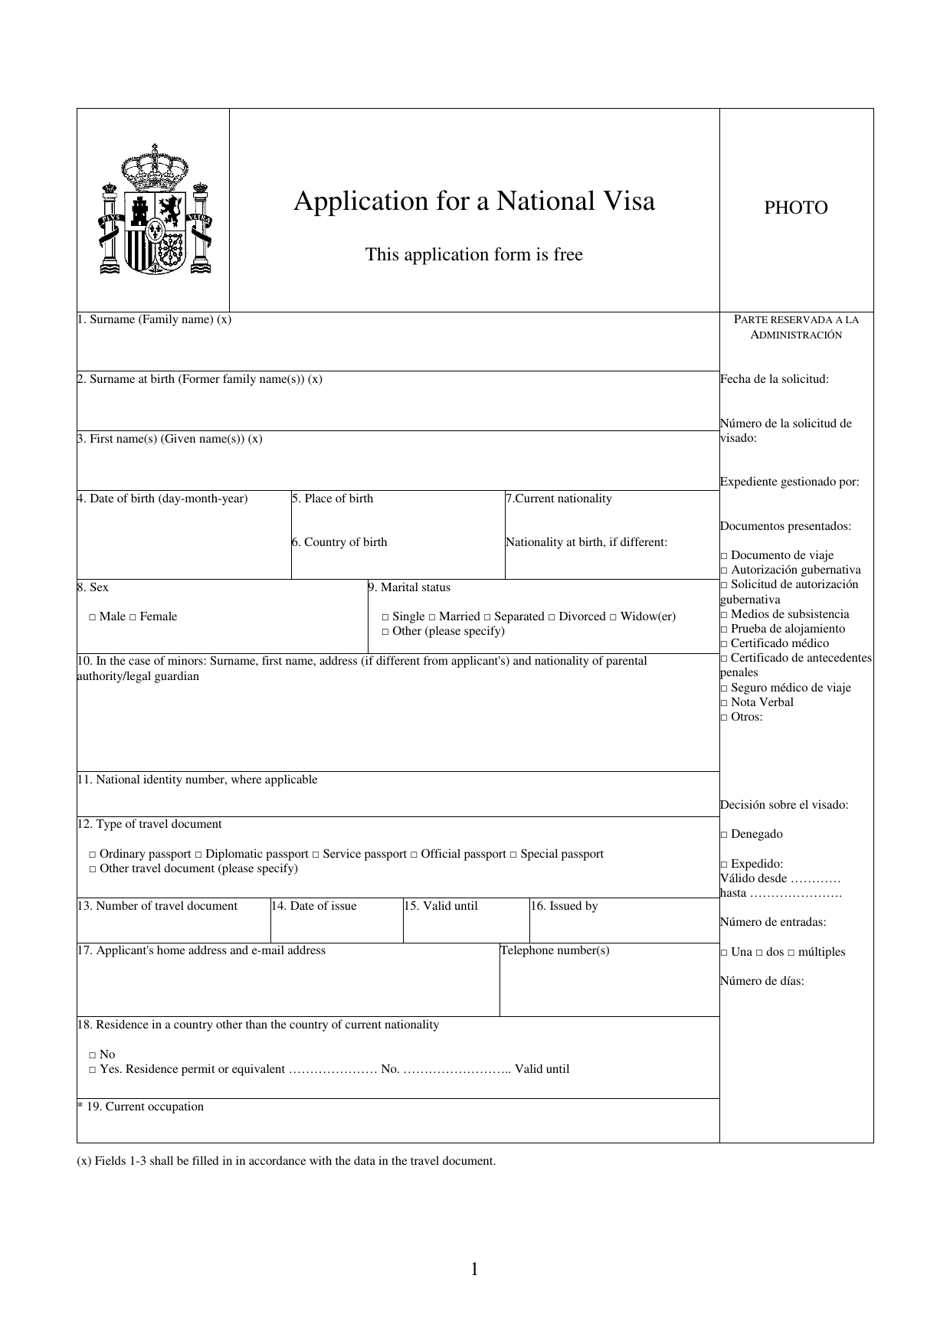 Application for a National Visa - Spain, Page 1